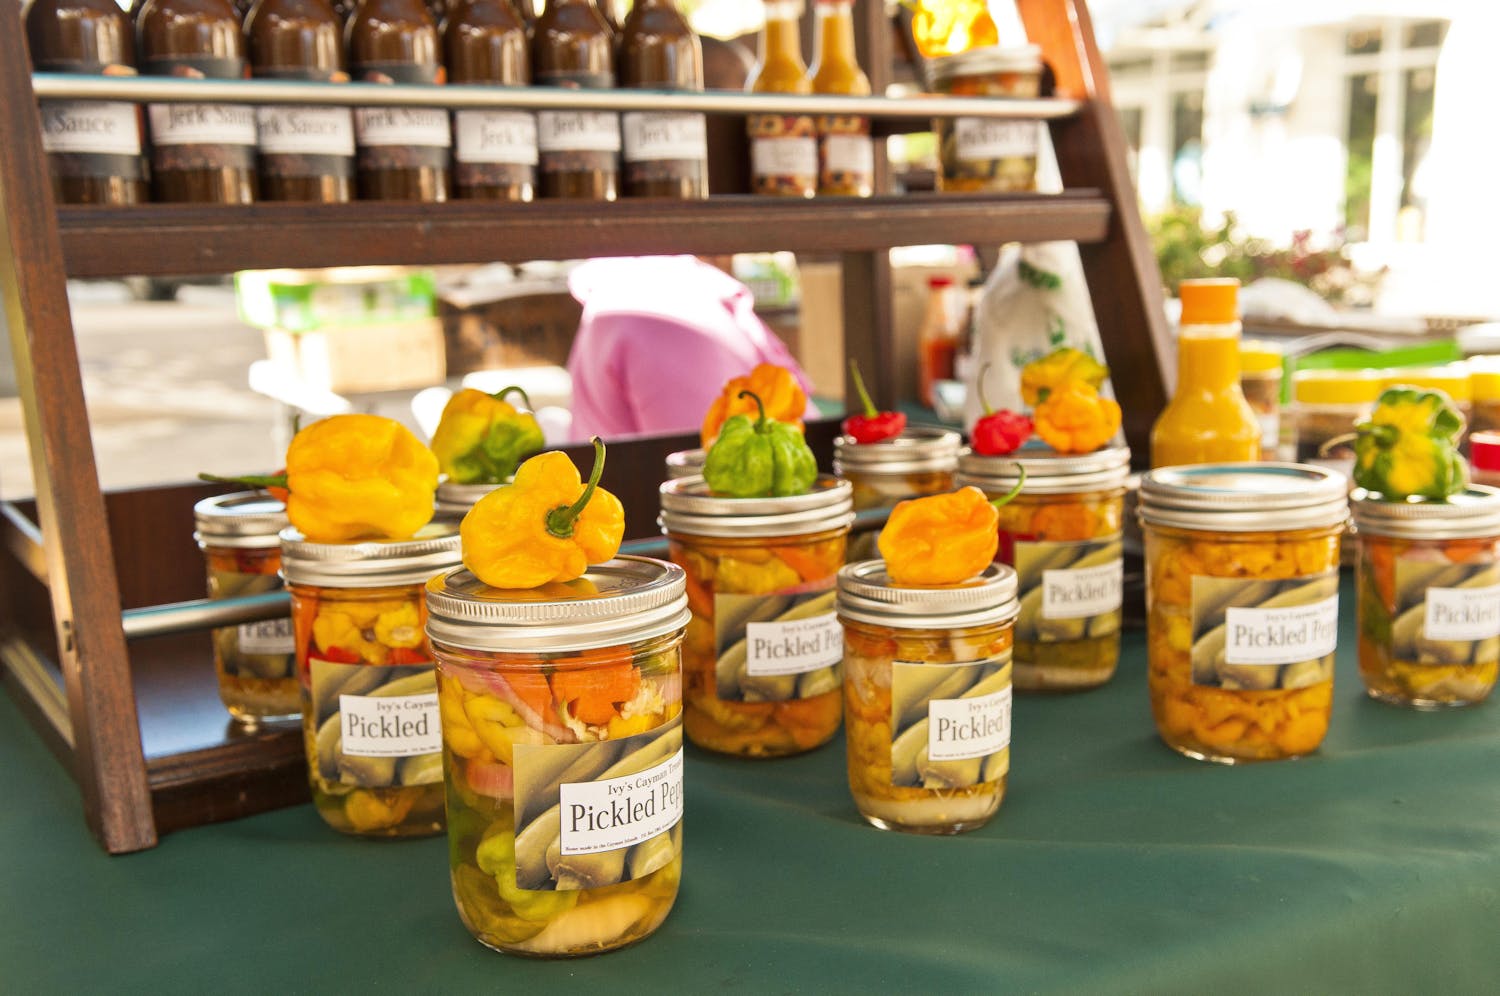 Locally made pickled peppers at the farmers market